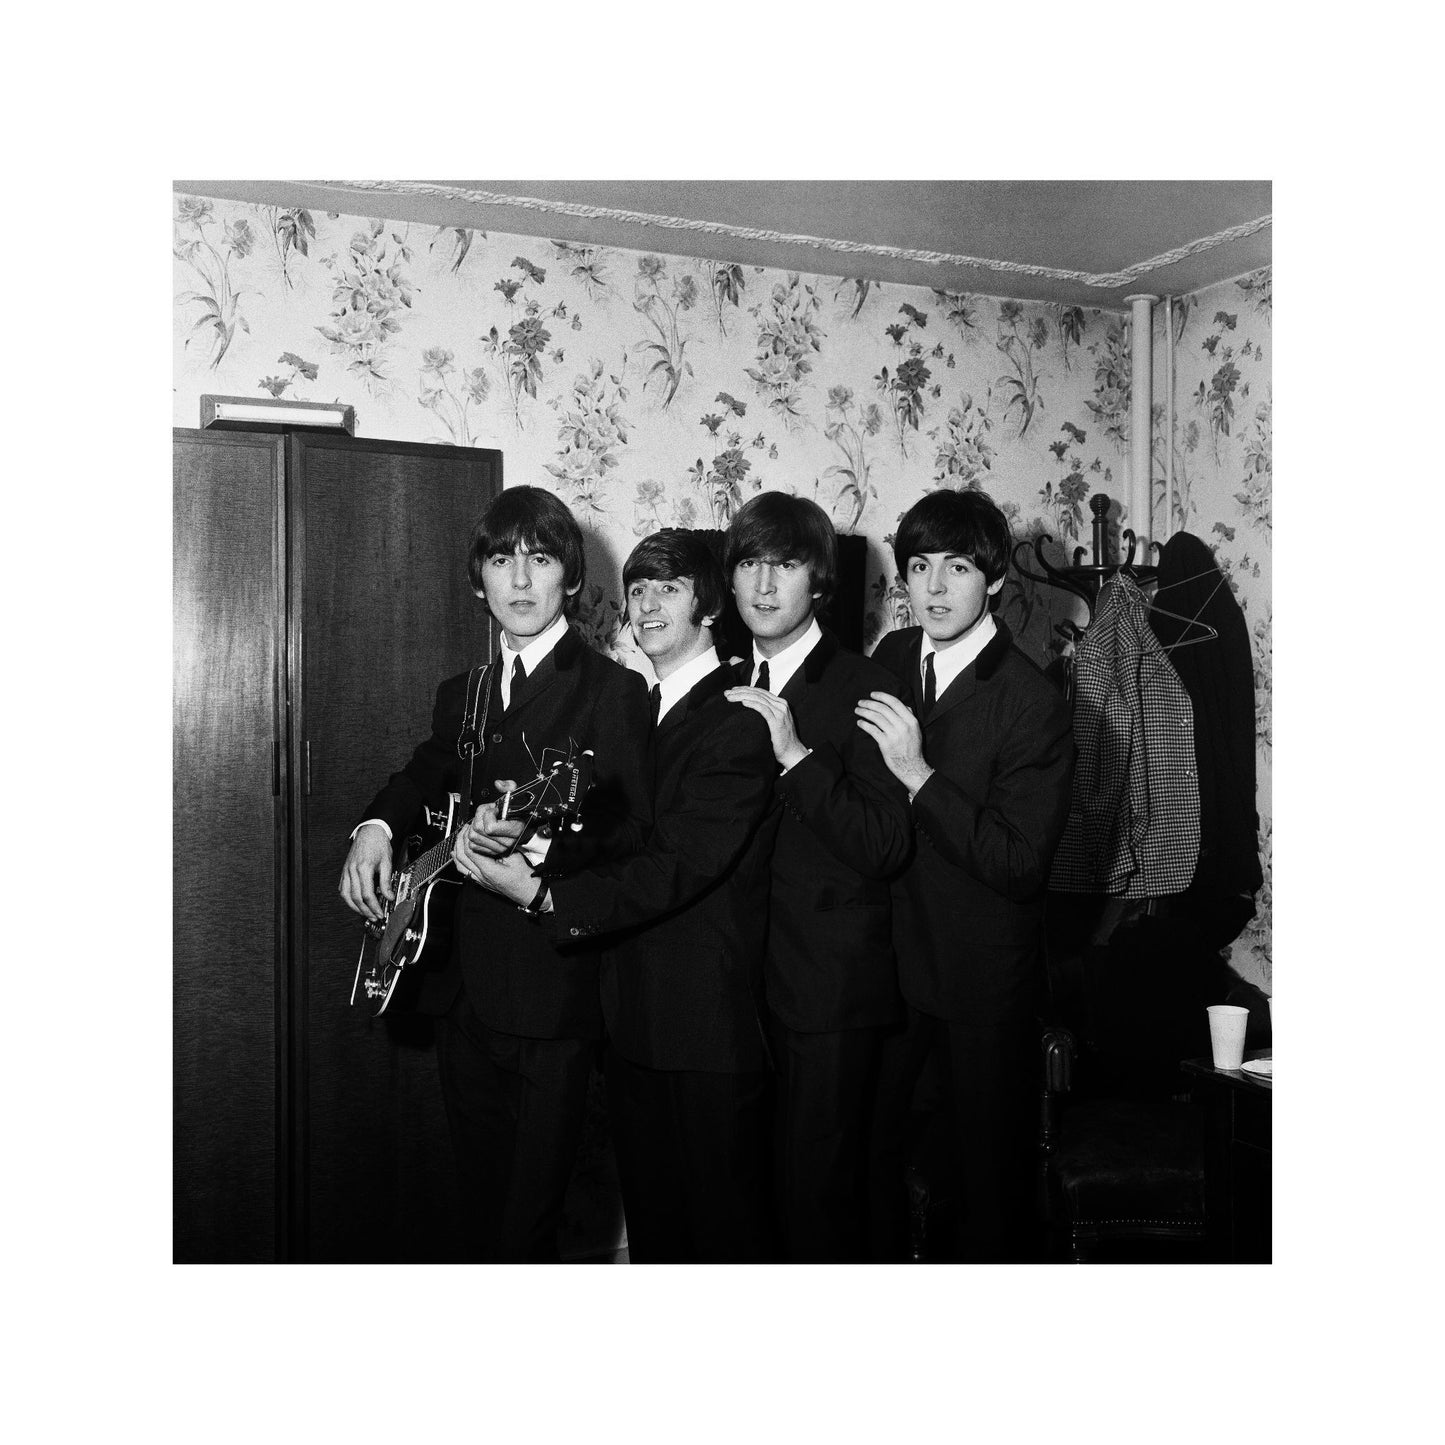 The Beatles - Lined Up In their Dressing Room, England, 1964 Print